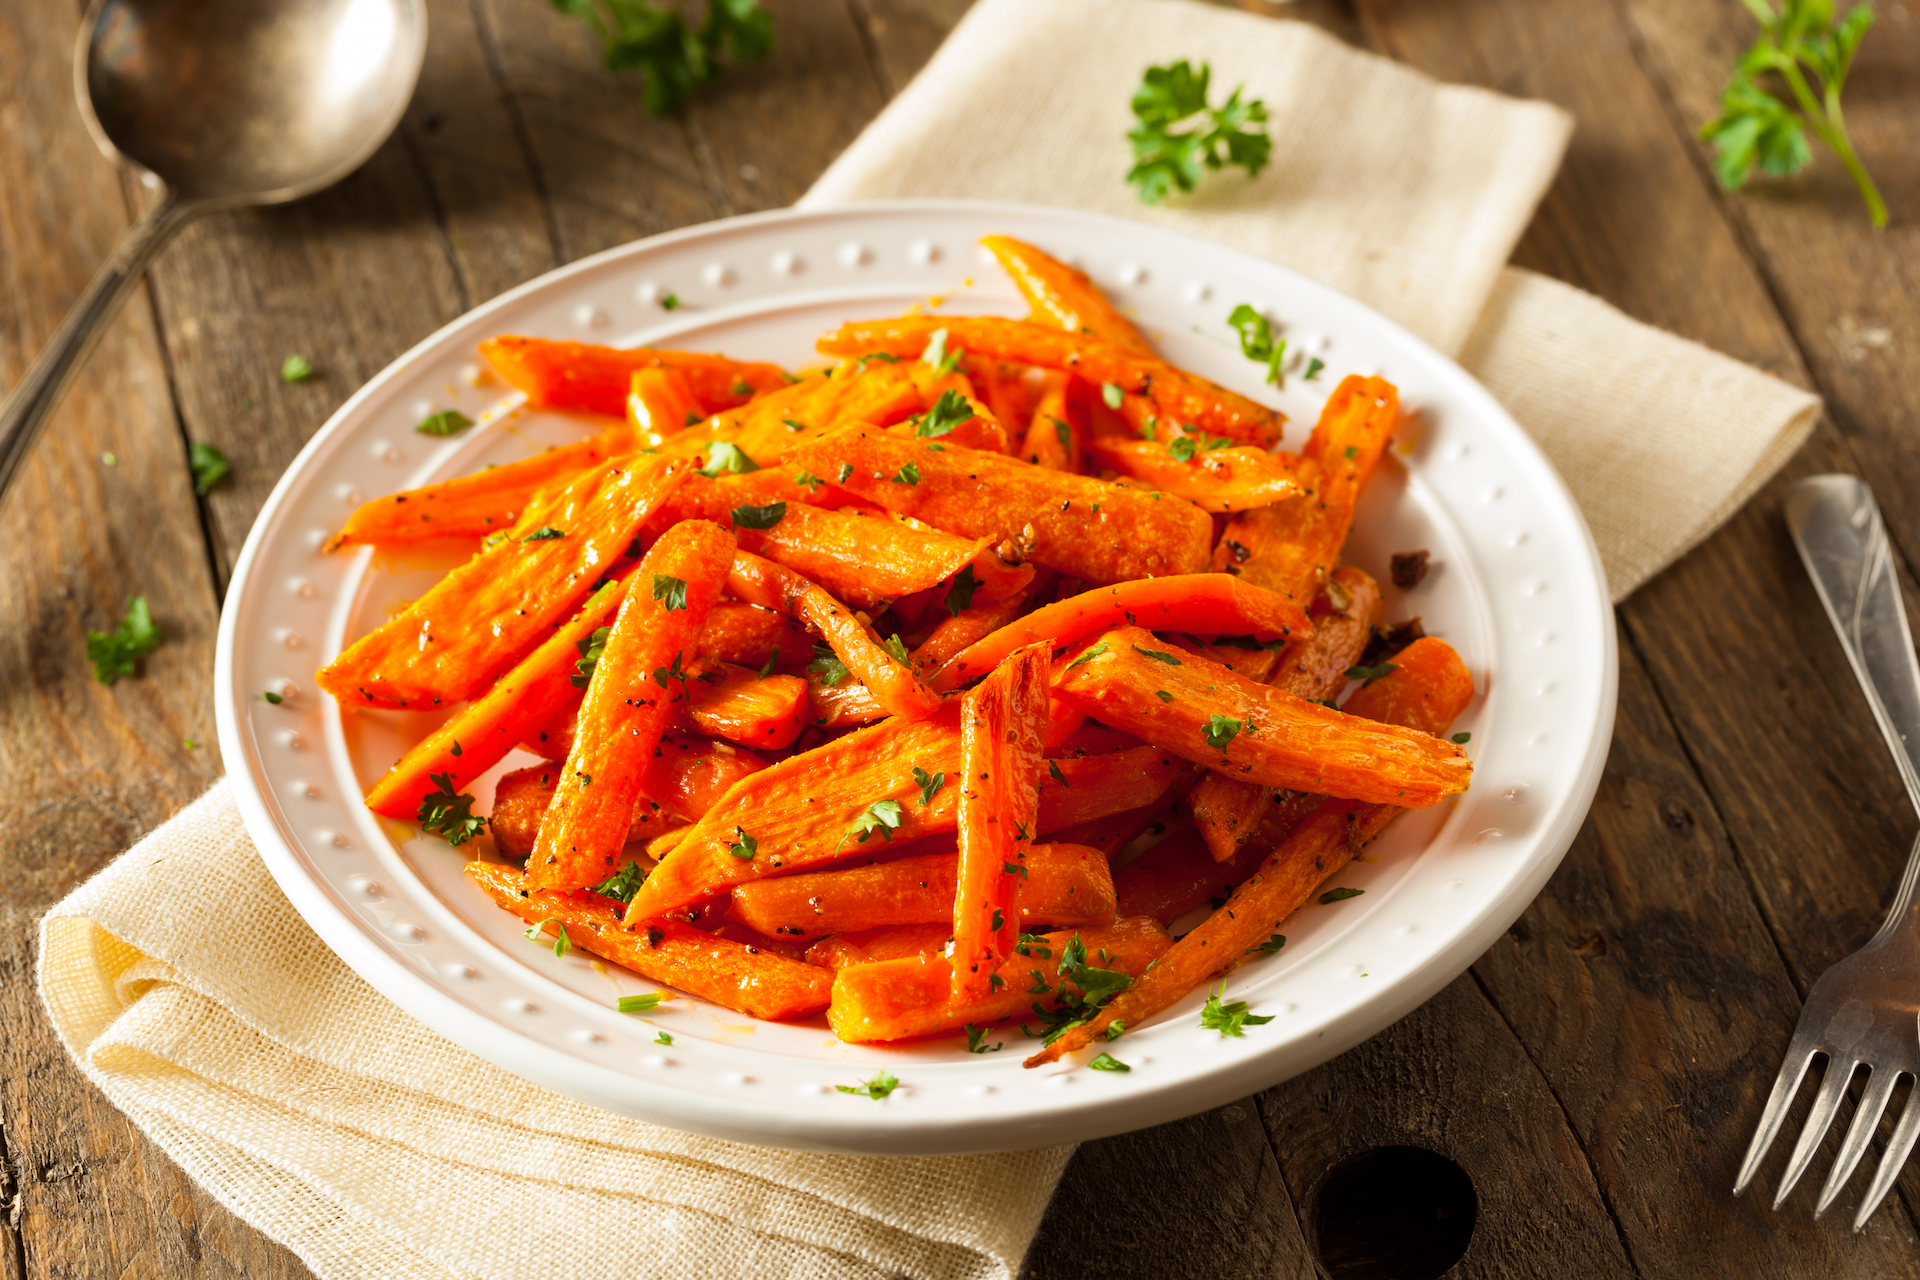 A healthy carrot dish to boost eye health for Splash Tears eye drops to promote healthy living